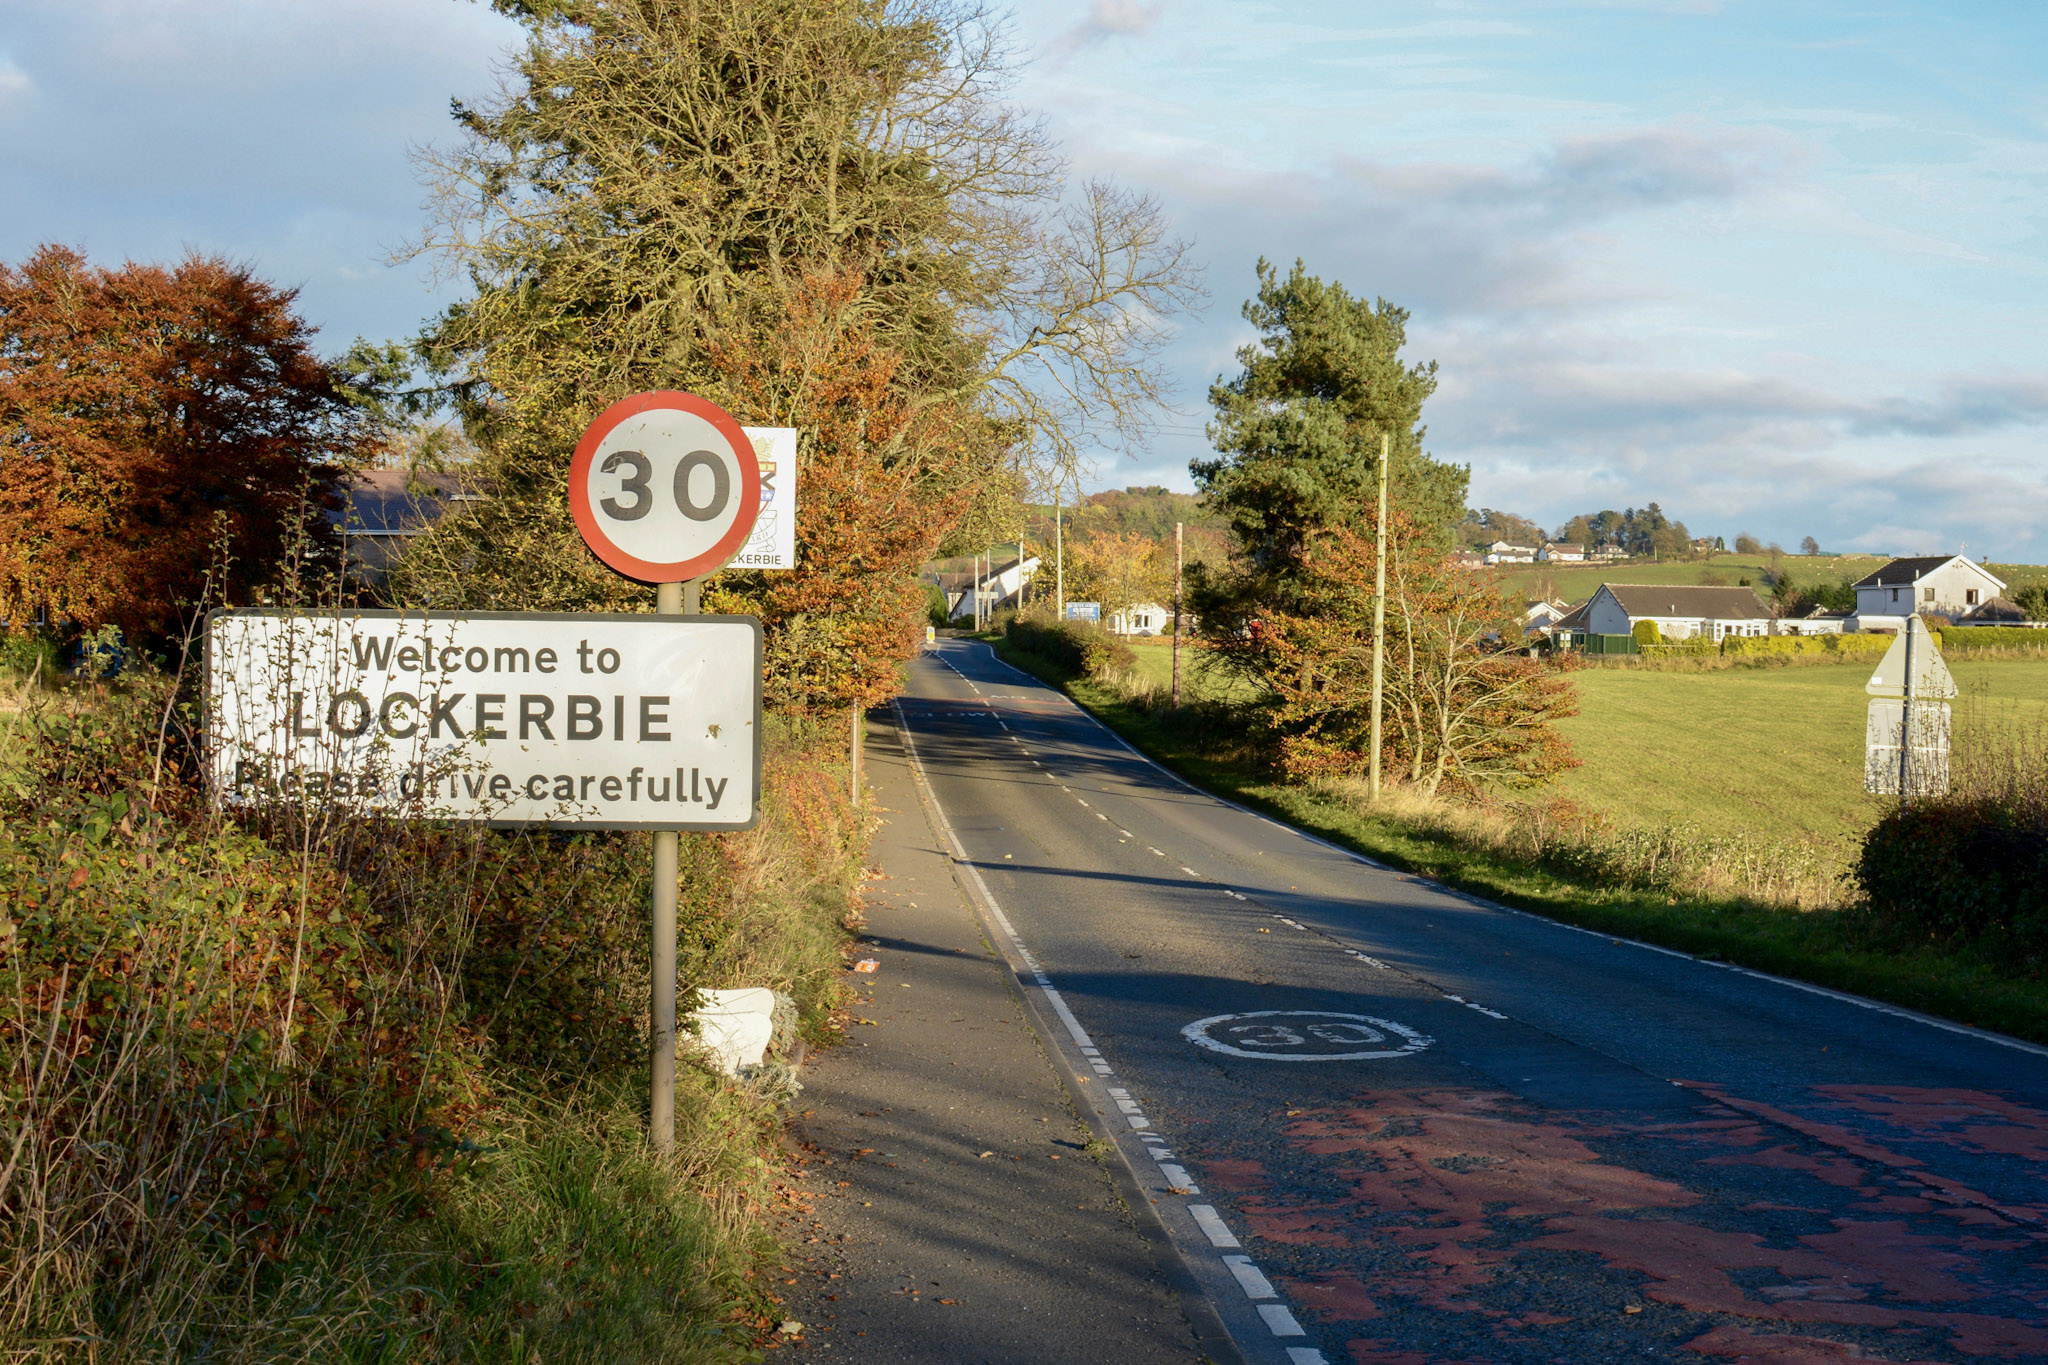 stock image of a road leading into the Scottish community of Lockerbie